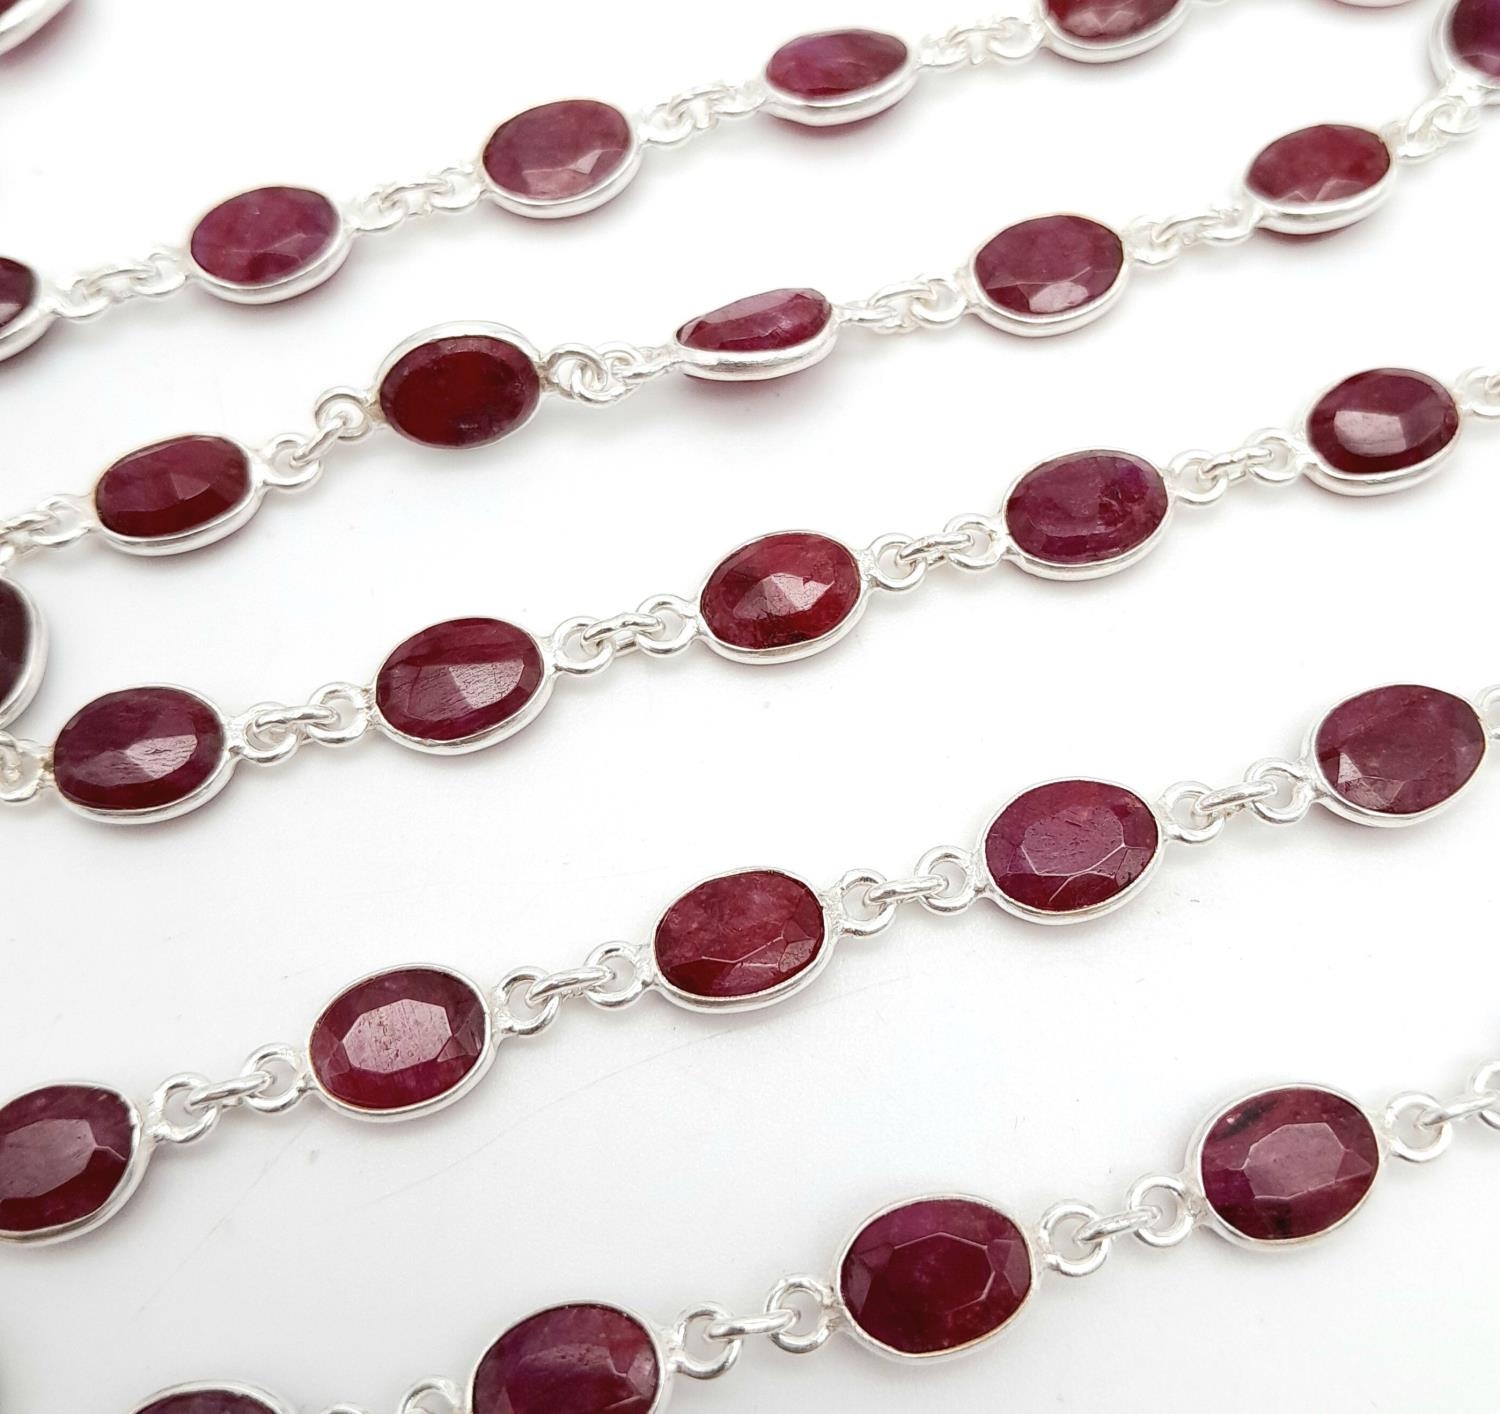 A Ruby Gemstone Long Chain Necklace. Oval cuts set in 925 Silver. 60cm length. Ref: CD-1319 - Image 4 of 5